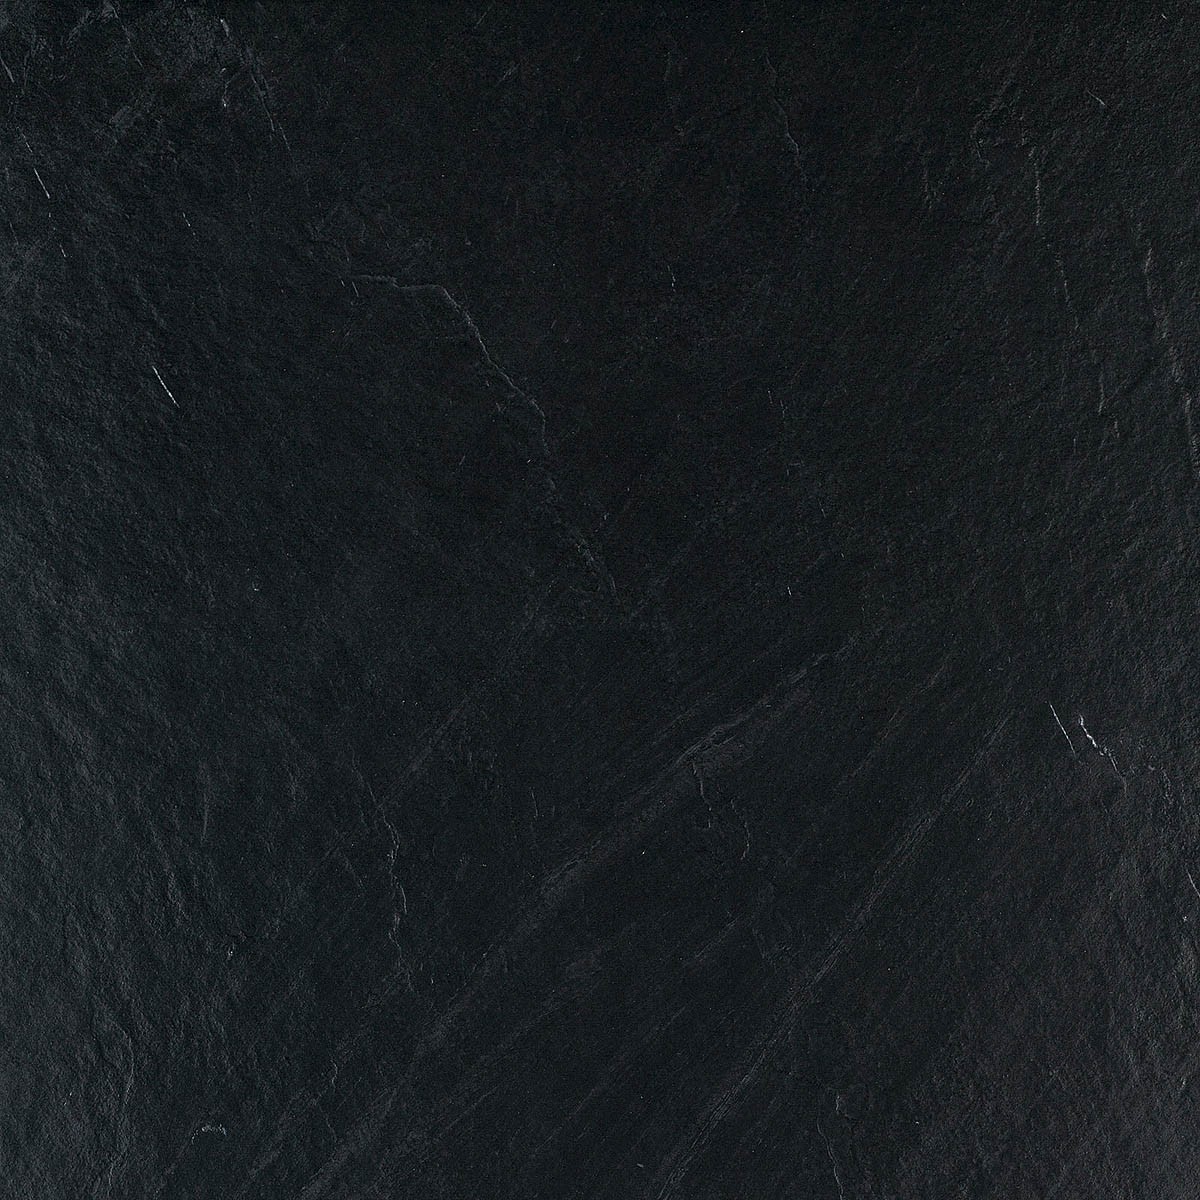 Craven Dunnill M03W Obsidian Nero Natural Floor Tile 750x750mm